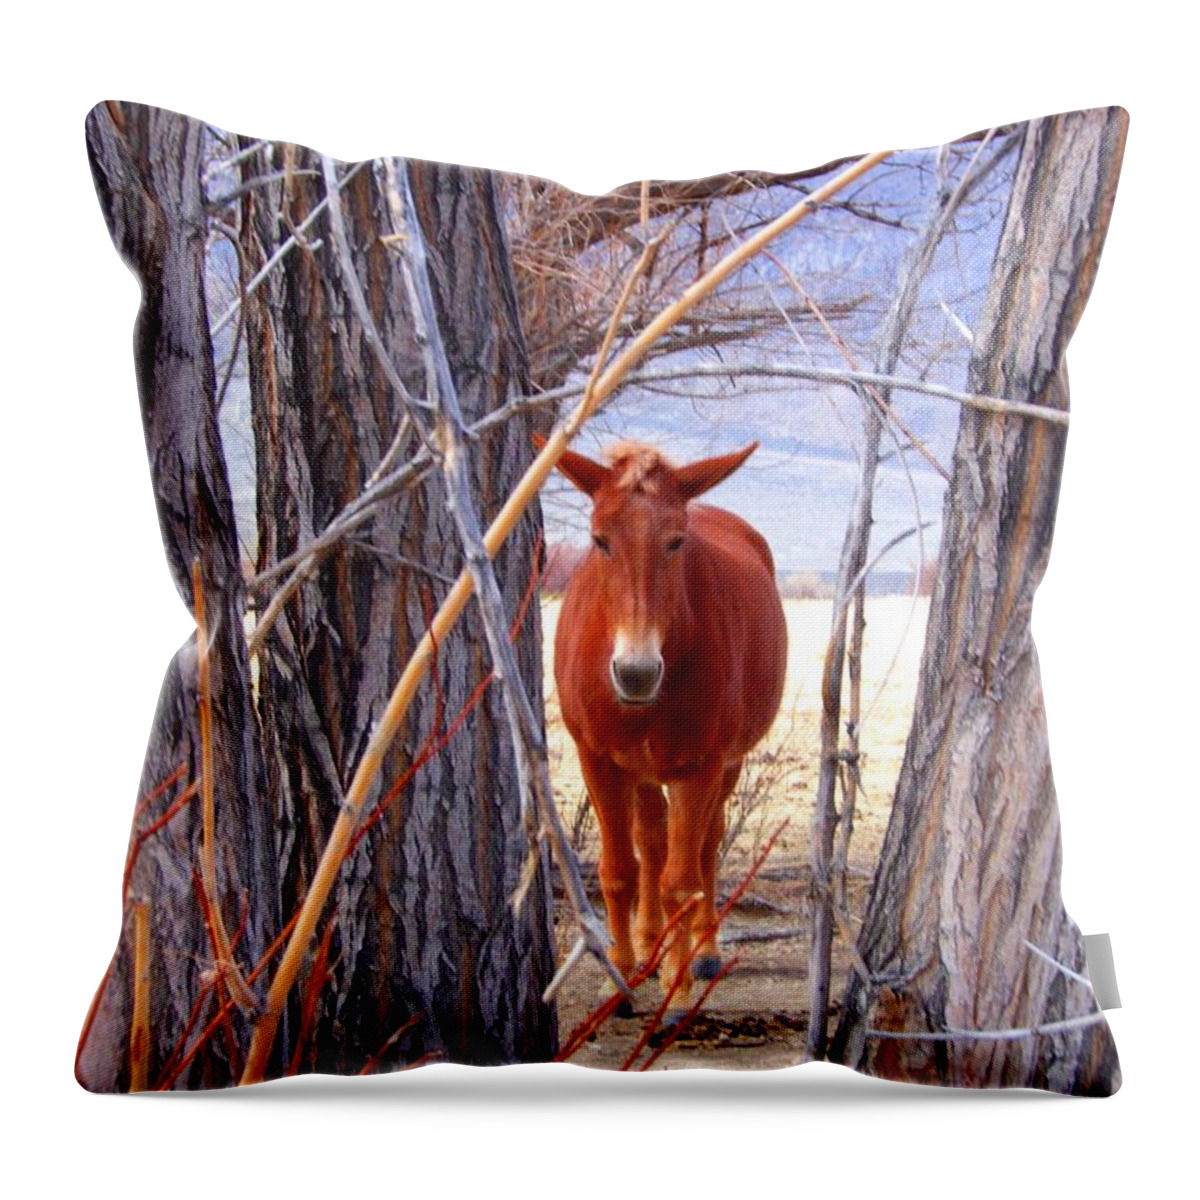 Mule Throw Pillow featuring the photograph Framed by Marilyn Diaz